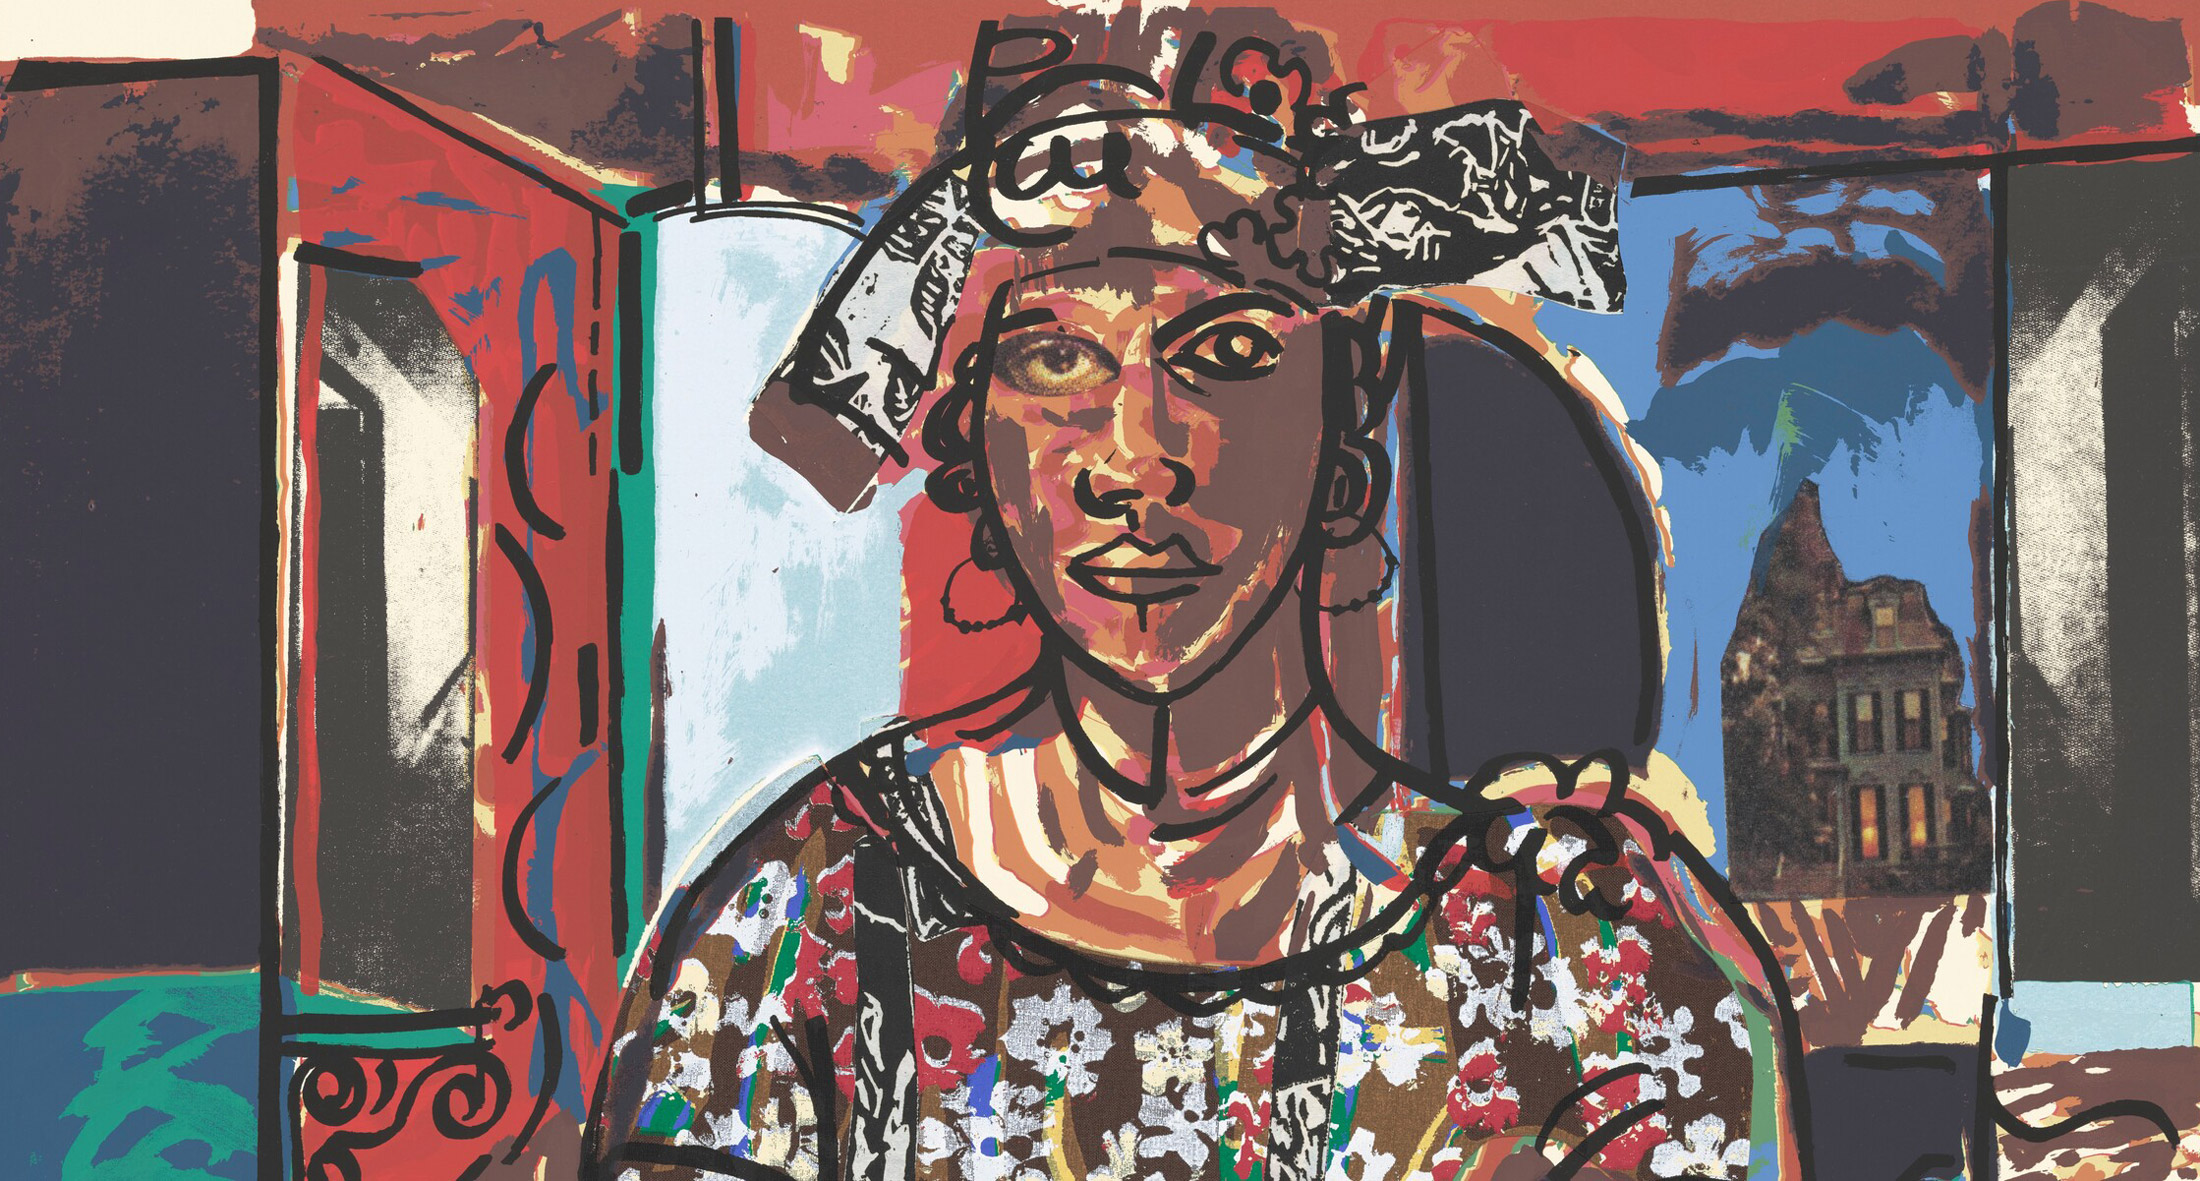 Detail of the face of  the woman in the Woman in Interior, 2008 by David C. Driskell